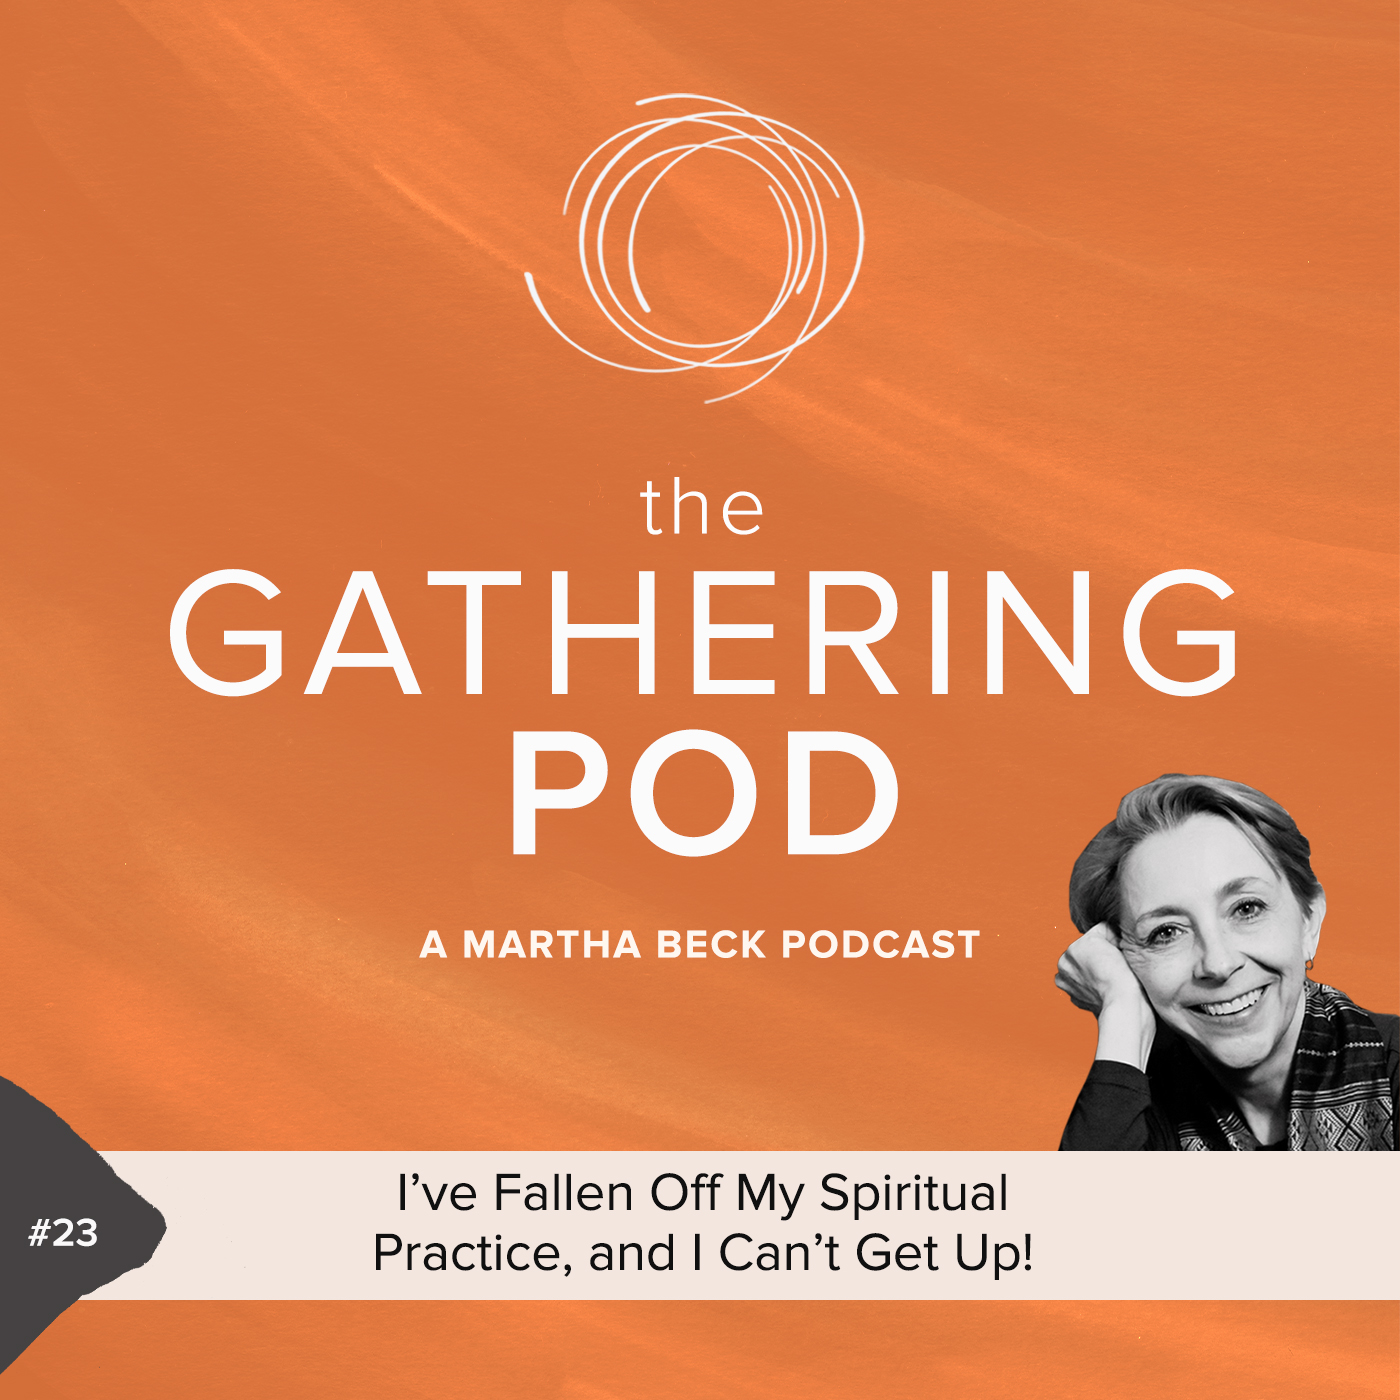 Image for The Gathering Pod A Martha Beck Podcast Episode #23 I’ve Fallen Off My Spiritual Practice, and I Can’t Get Up!